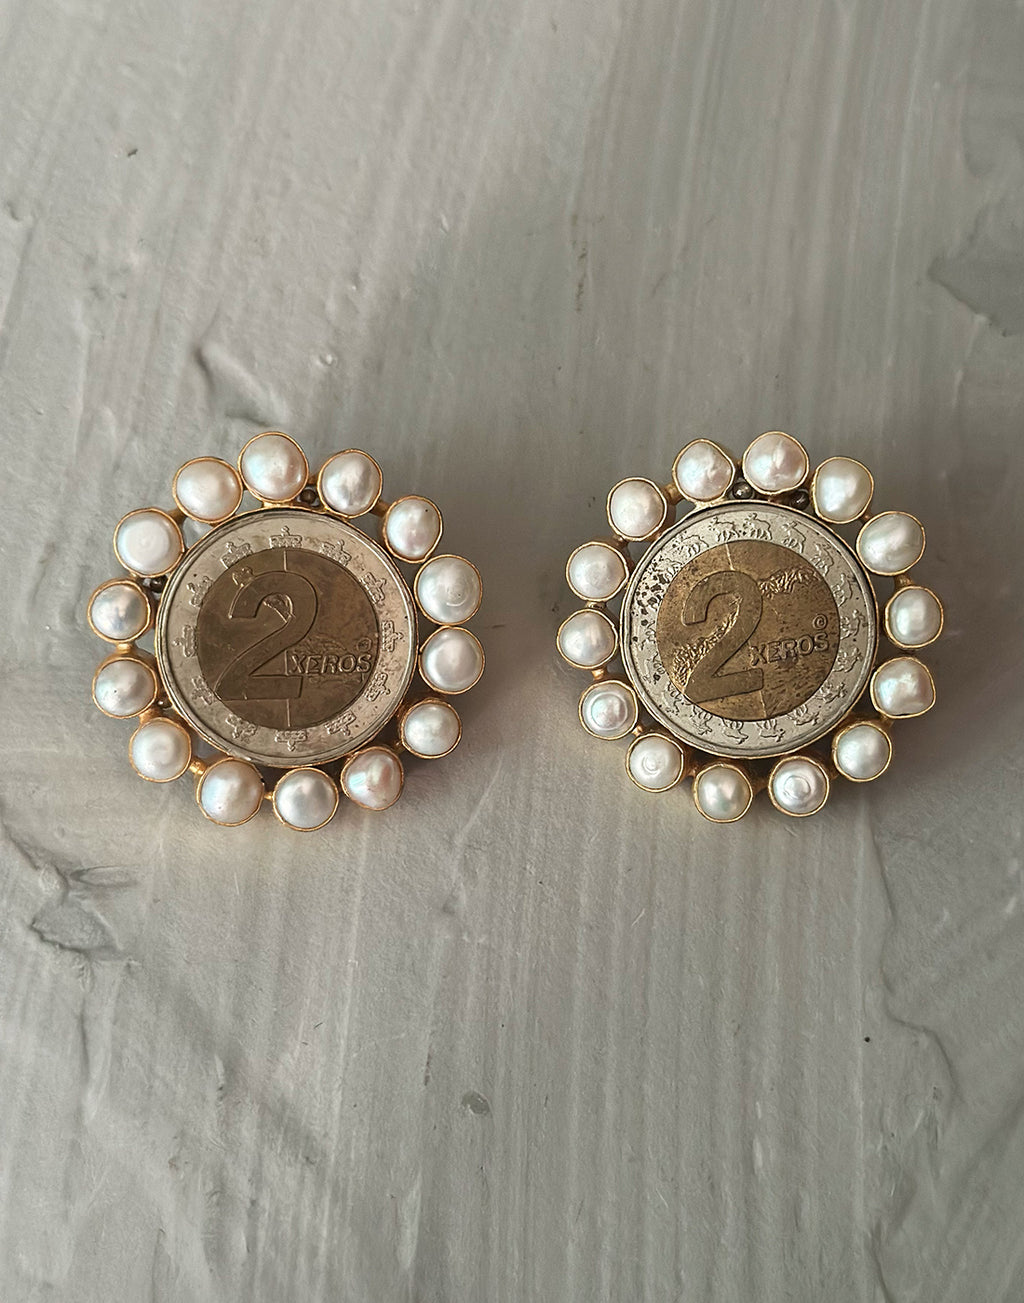 Pearl Frame Coin Earrings - Statement Earrings - Gold-Plated & Hypoallergenic Jewellery - Made in India - Dubai Jewellery - Dori